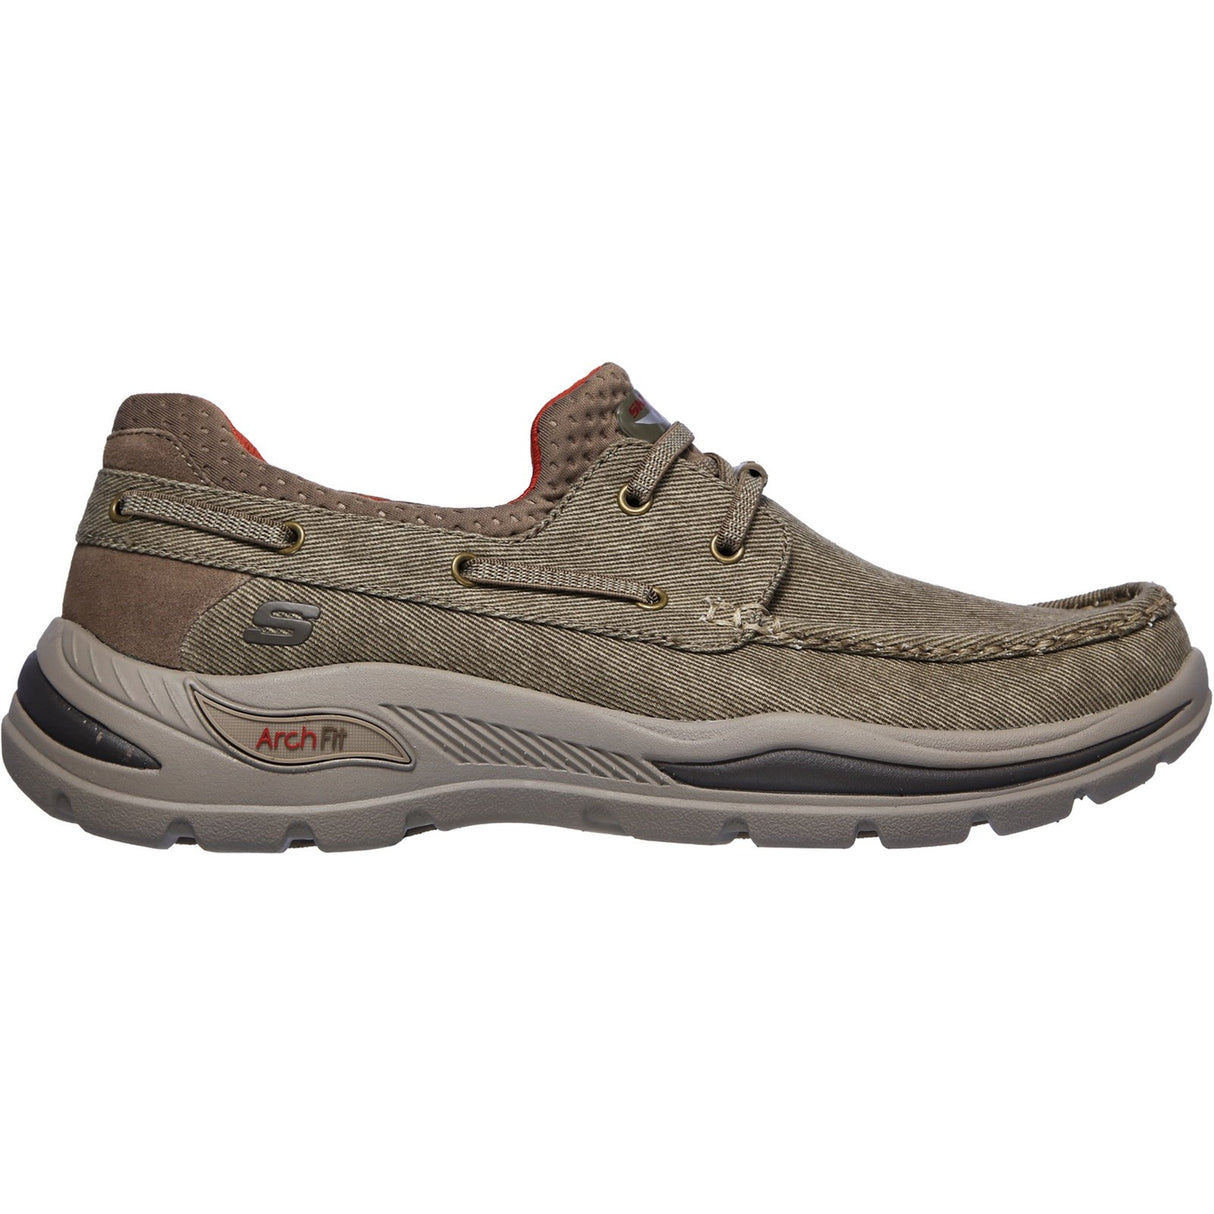 Skechers Arch Fit Motley Oven Slip On